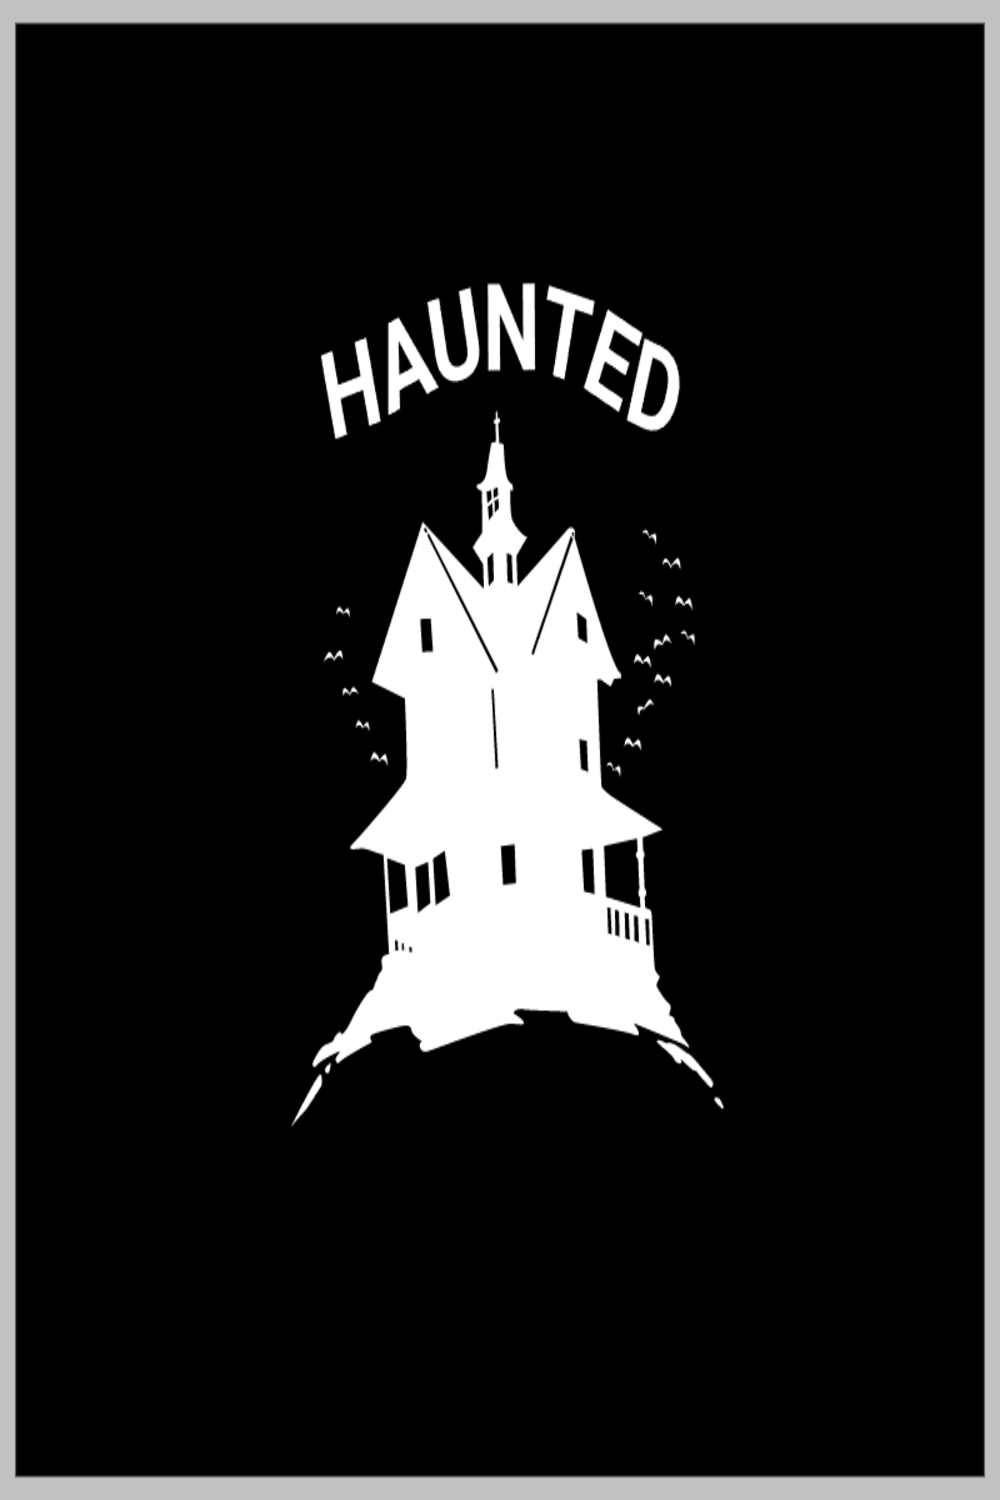 Scary Bloody T-Shirt Designs pinterest image.